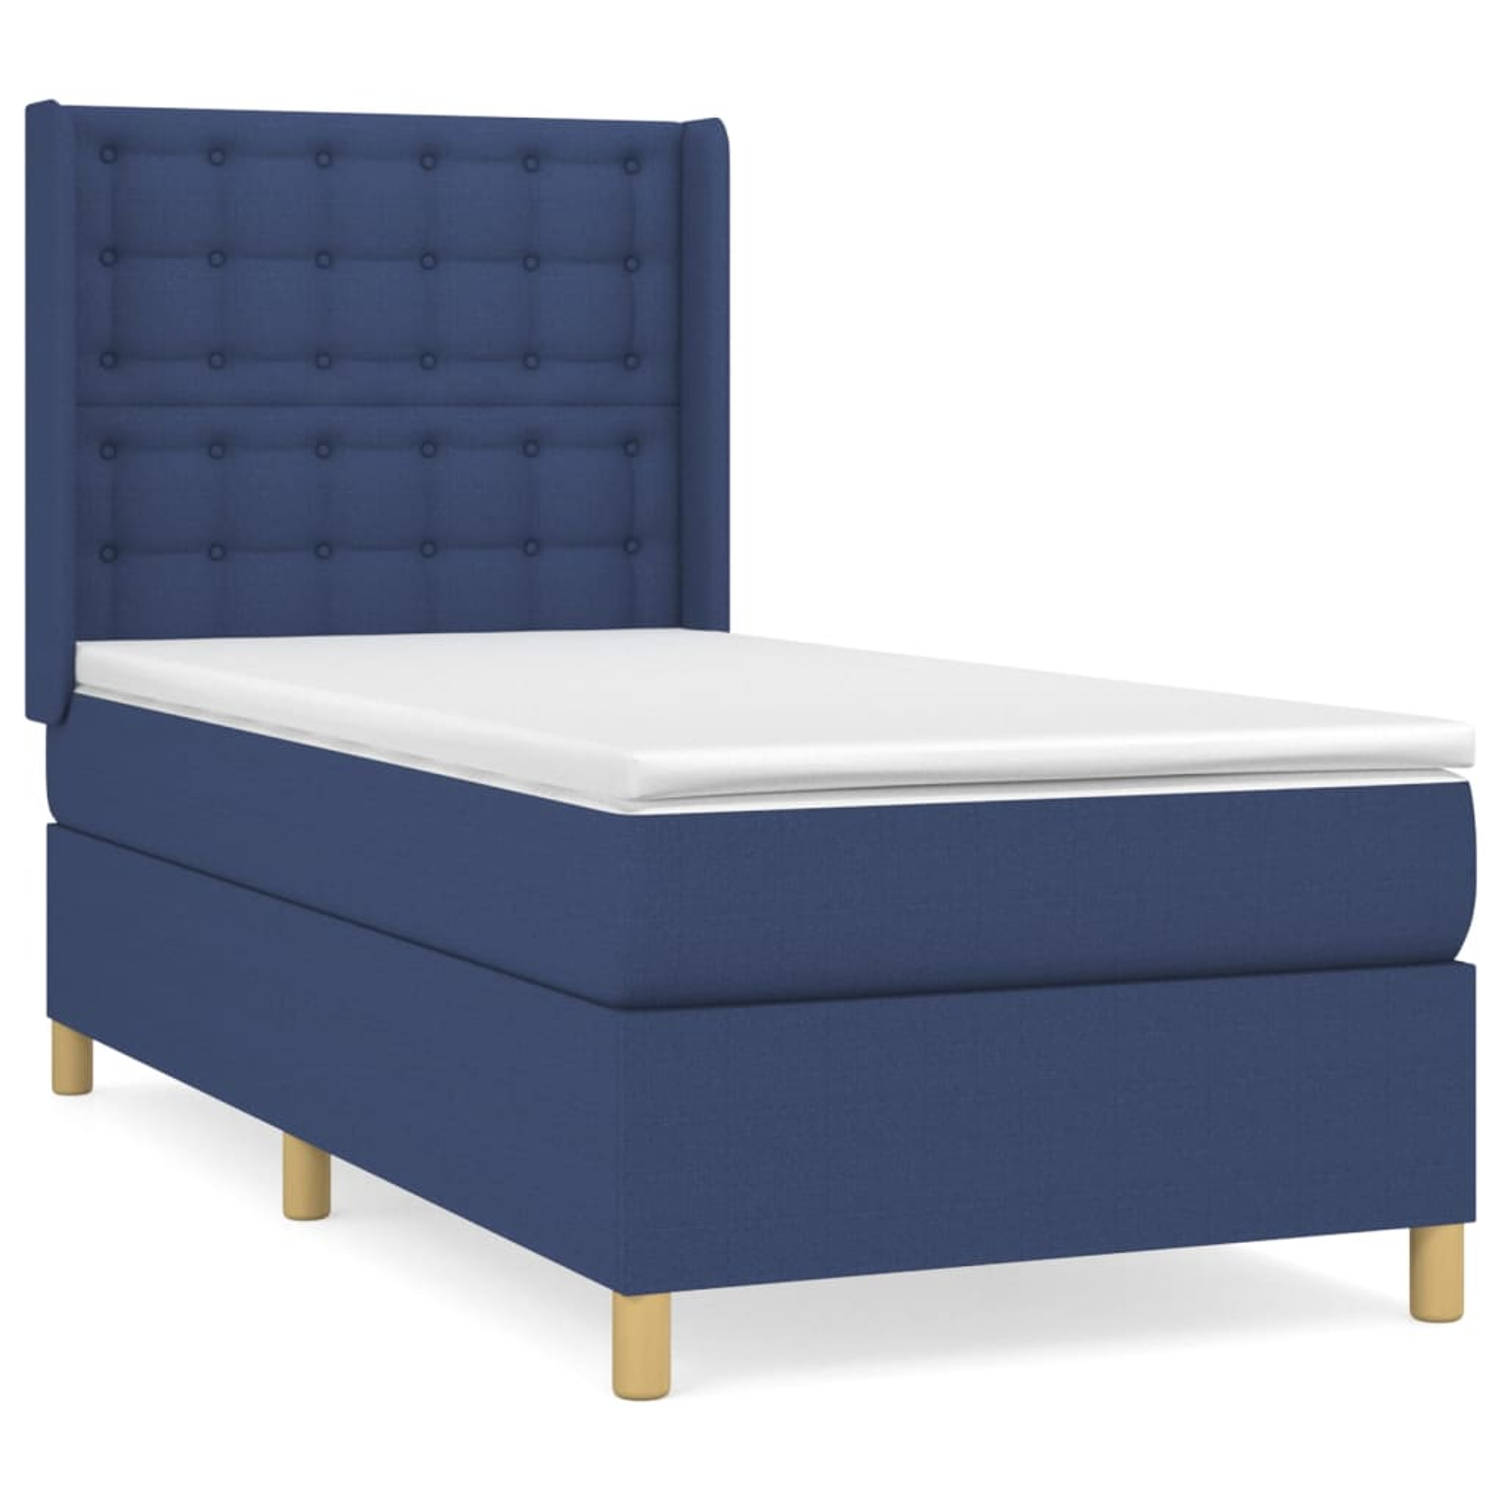 The Living Store Boxspring Bed - Blauw - 203 x 103 x 118/128 cm - Pocketvering Matras - Stof (100% polyester)